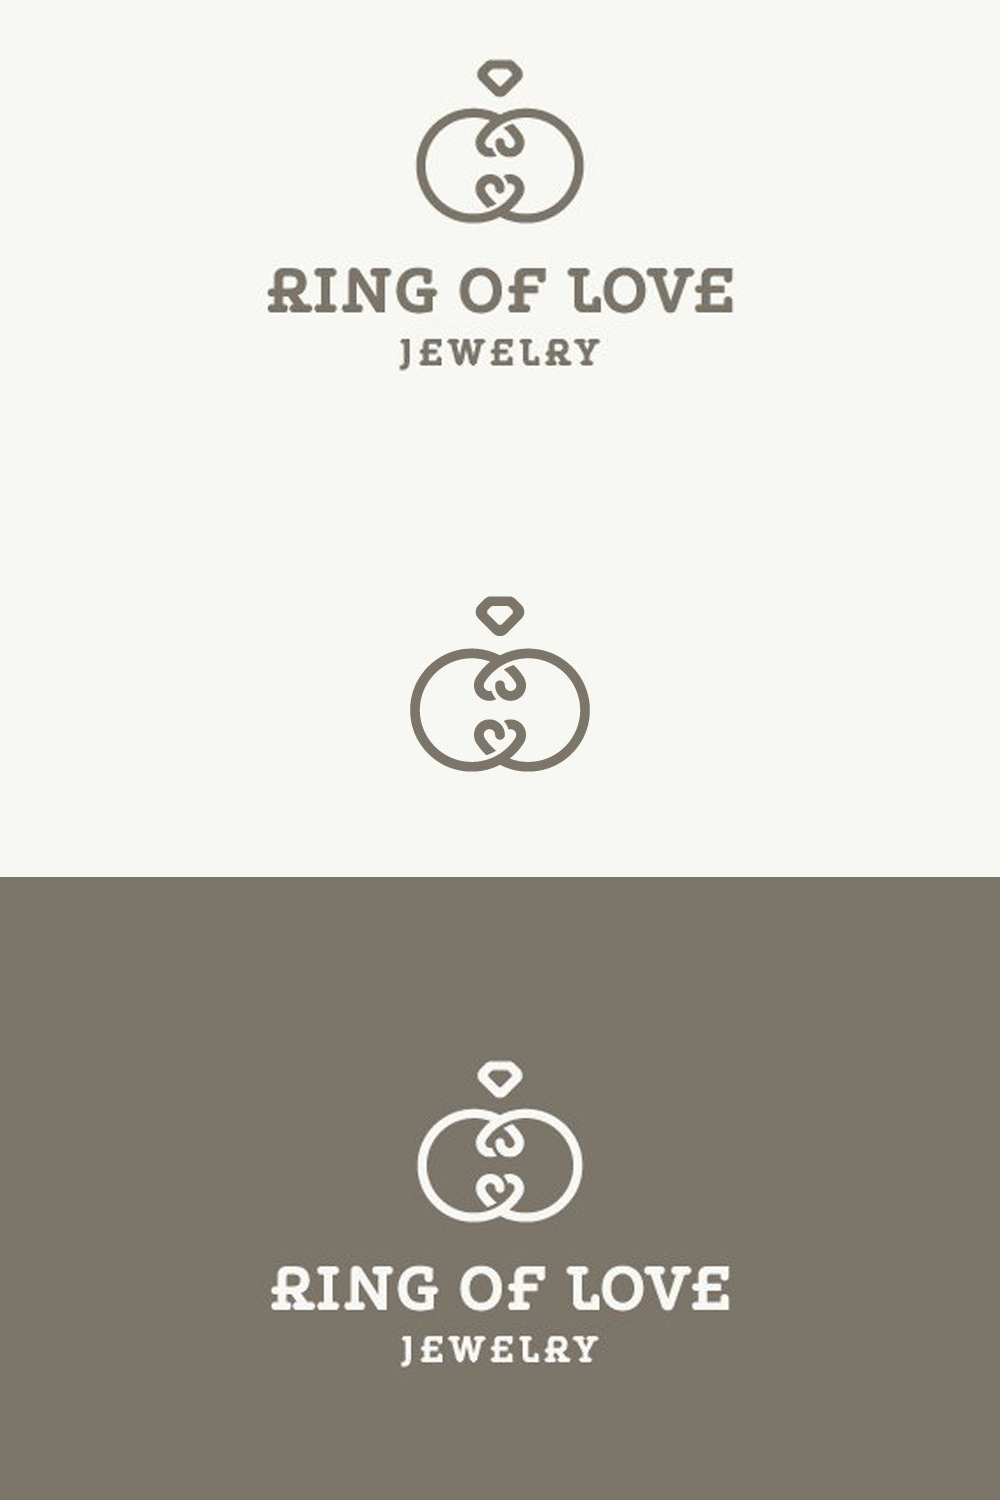 White logo with love rings on white and gray backgrounds.